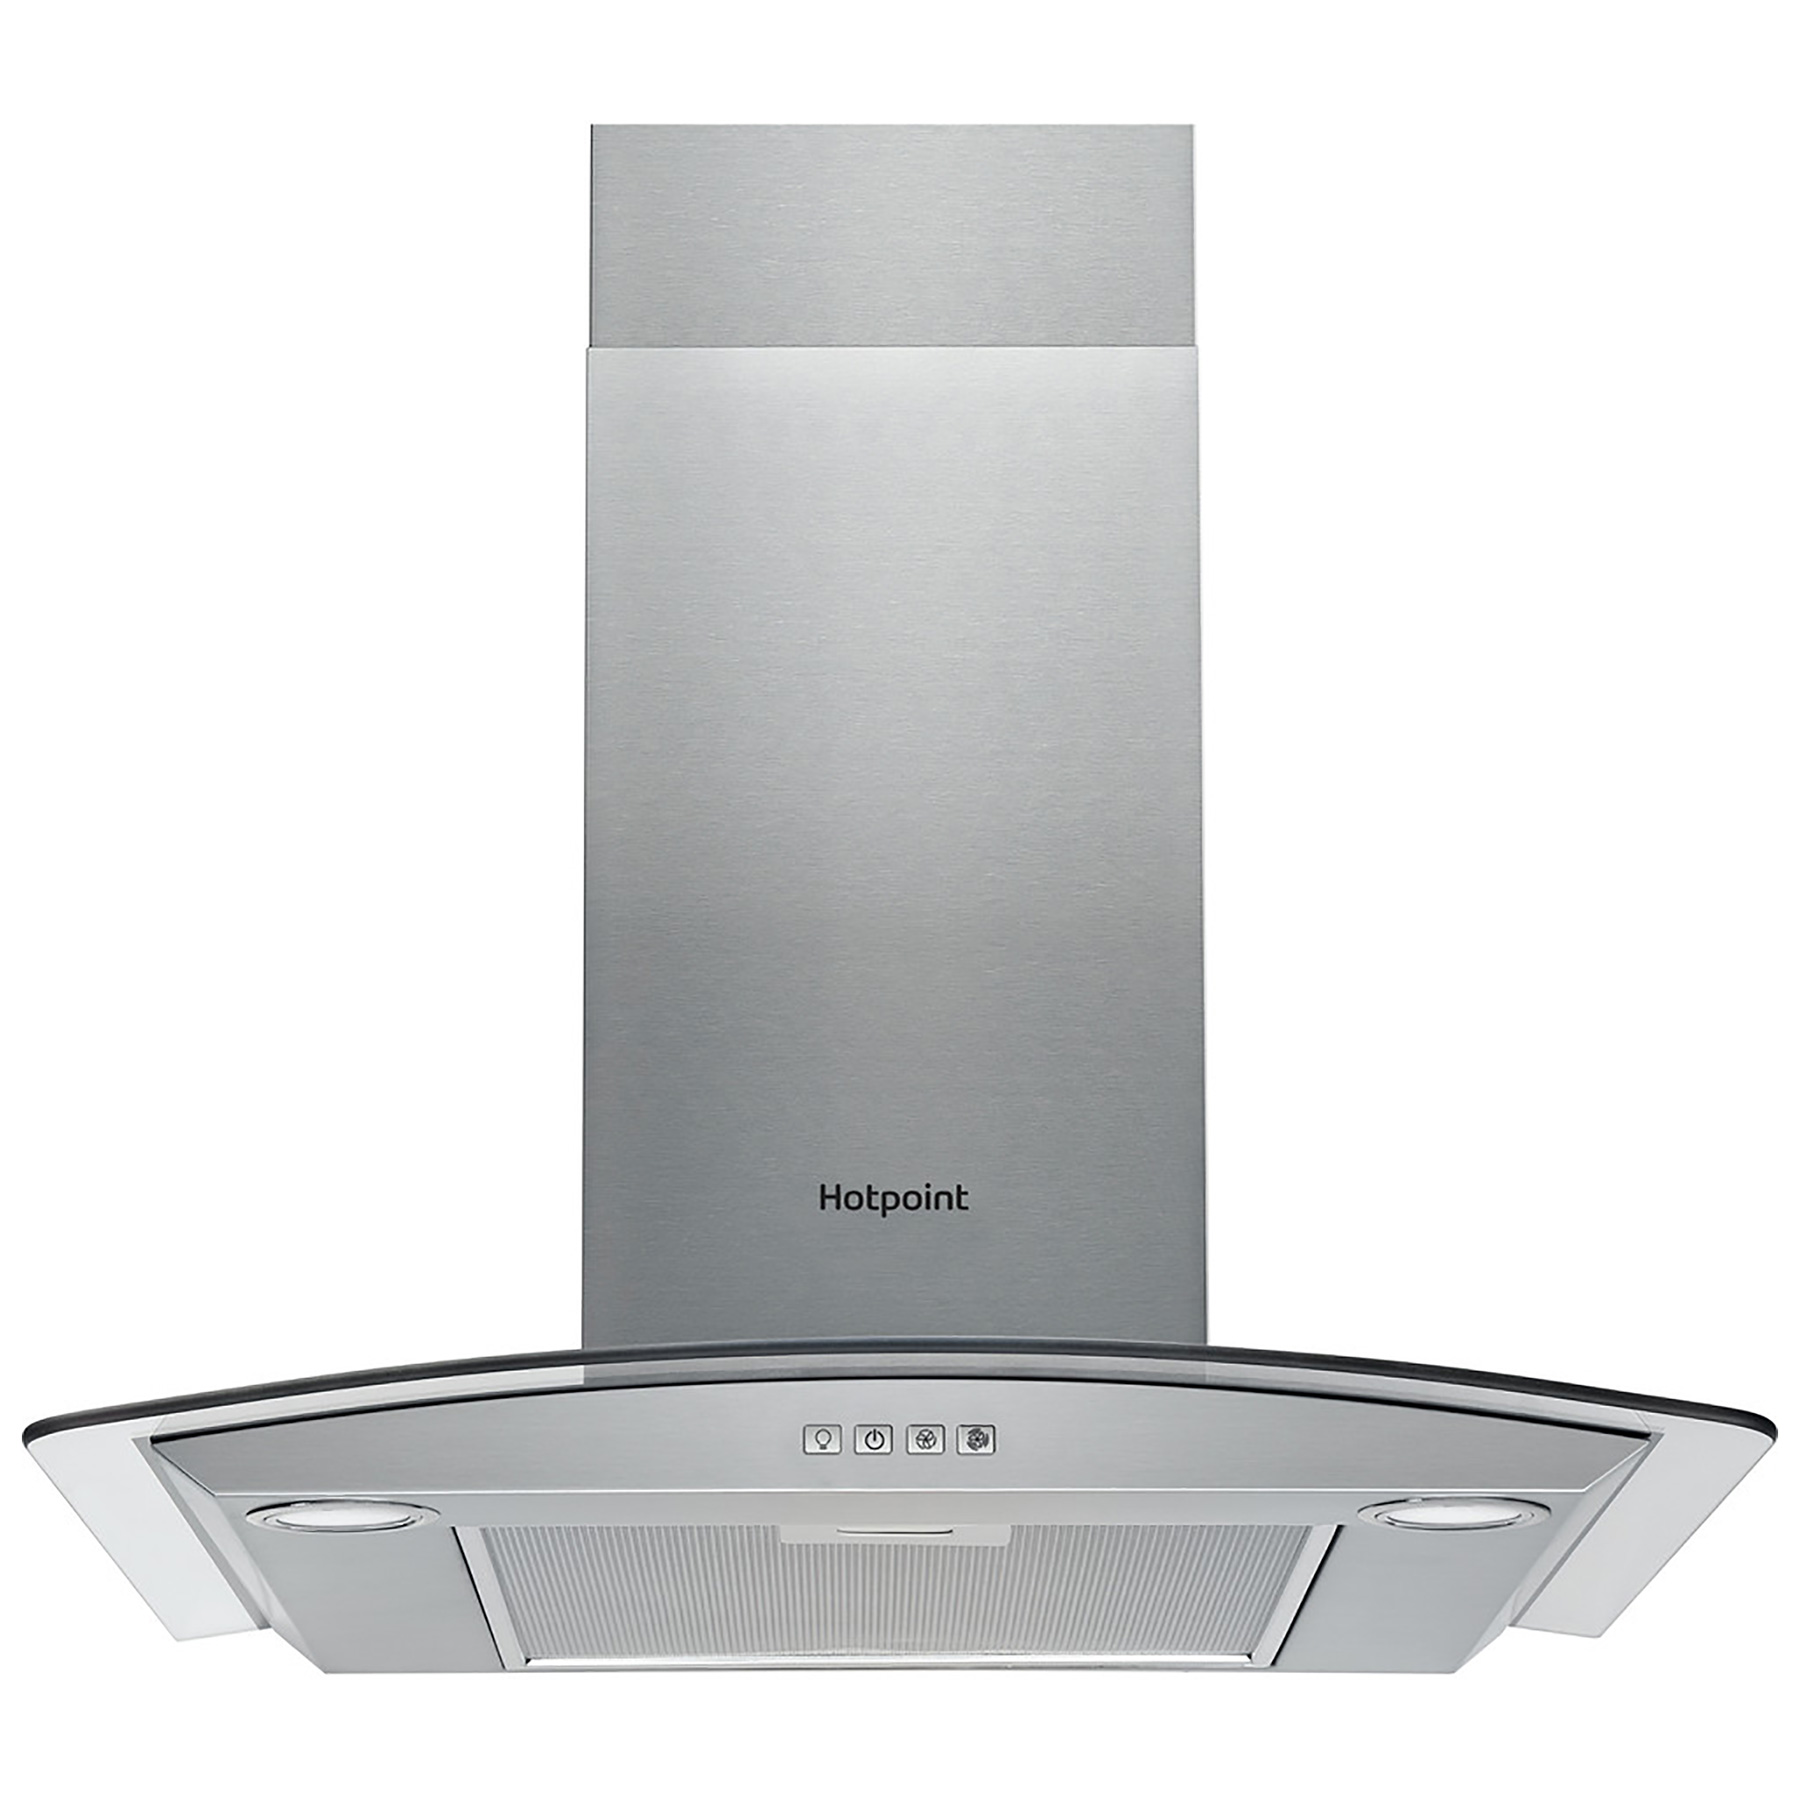 Image of Hotpoint PHGC6 4FLMX 60cm Curved Glass Chimney Hood in St Steel 3 Spee